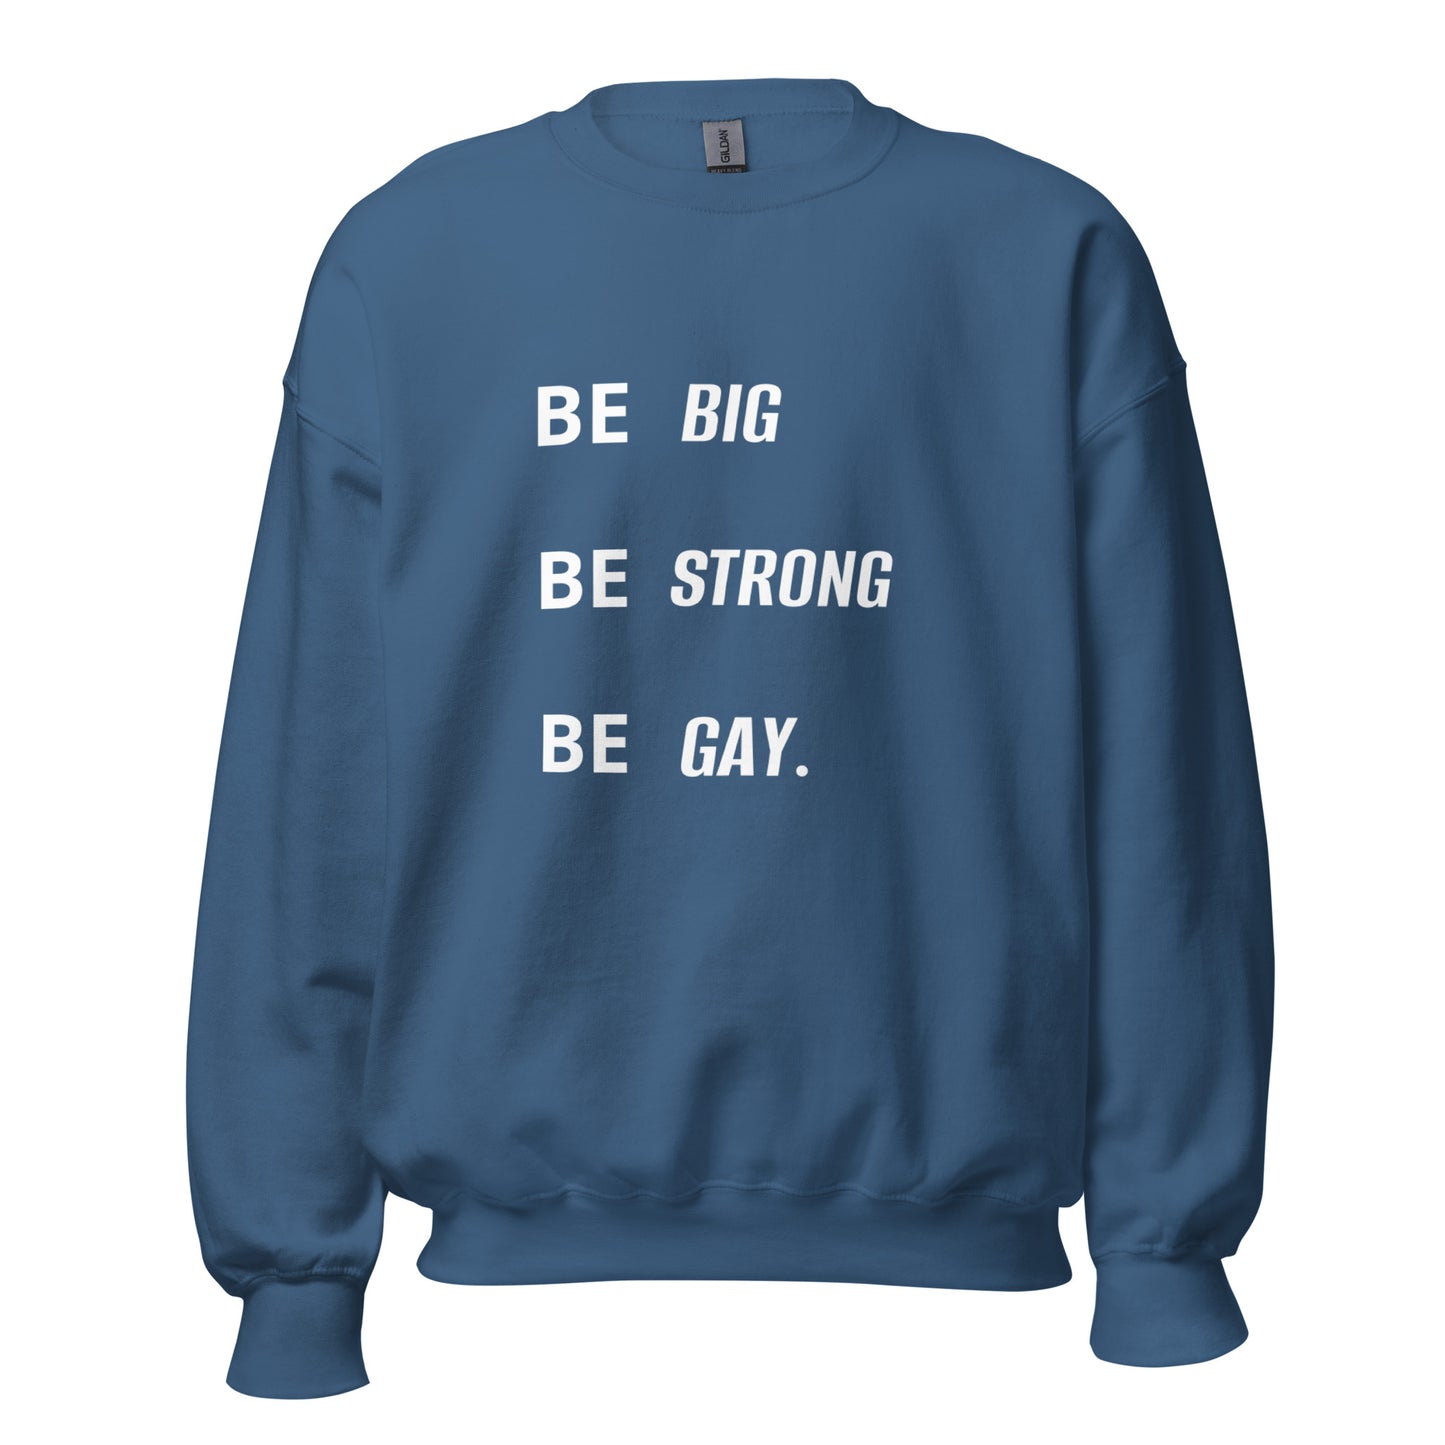 BE BIG BE STRONG BE GAY.